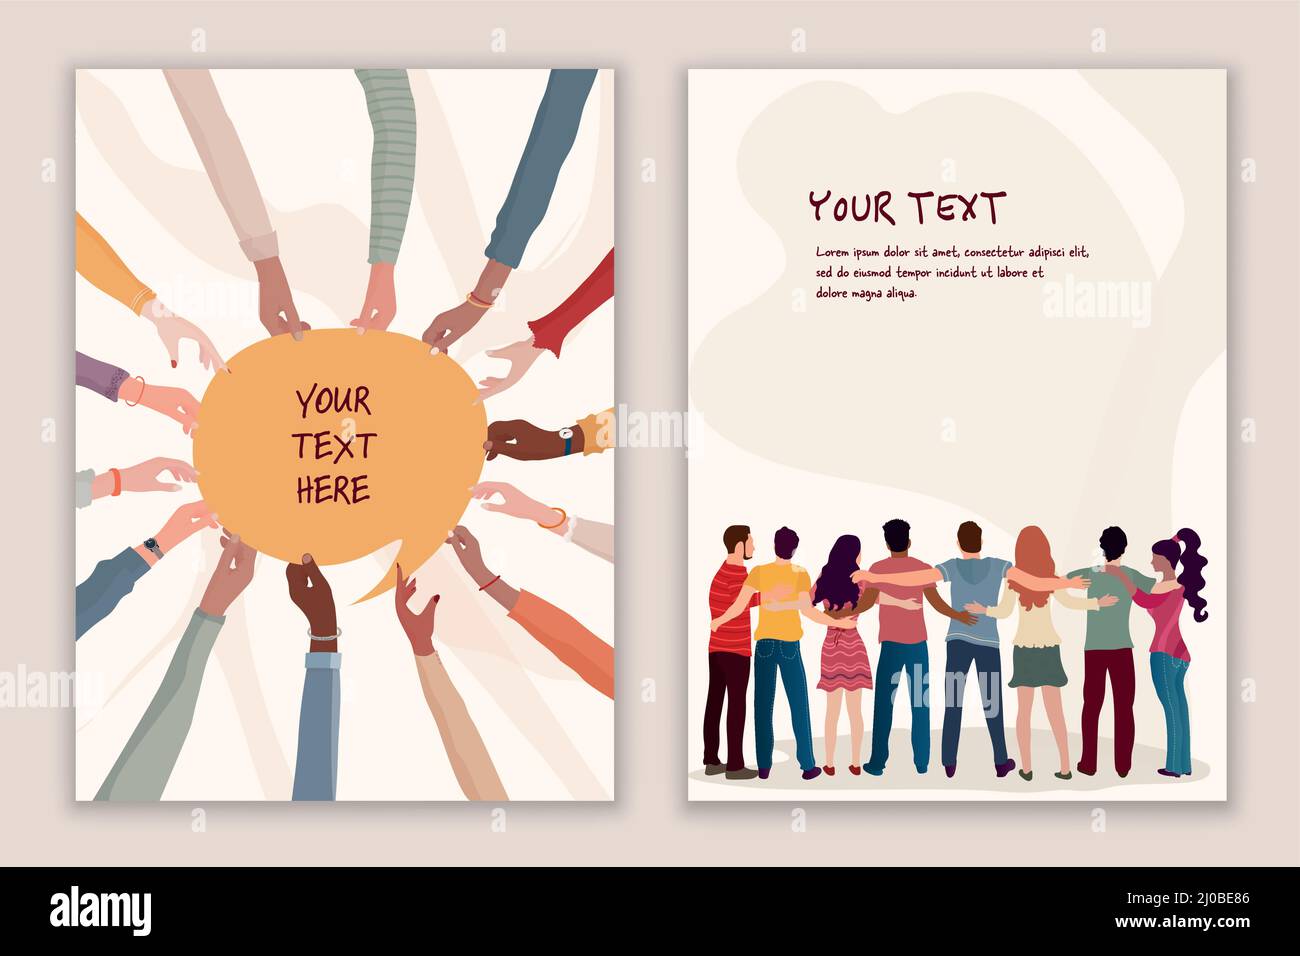 Group of multicultural volunteer people embraced viewed from behind and group of hands holding a speech bubble.NGO - flyer - brochure - poster - cover Stock Vector